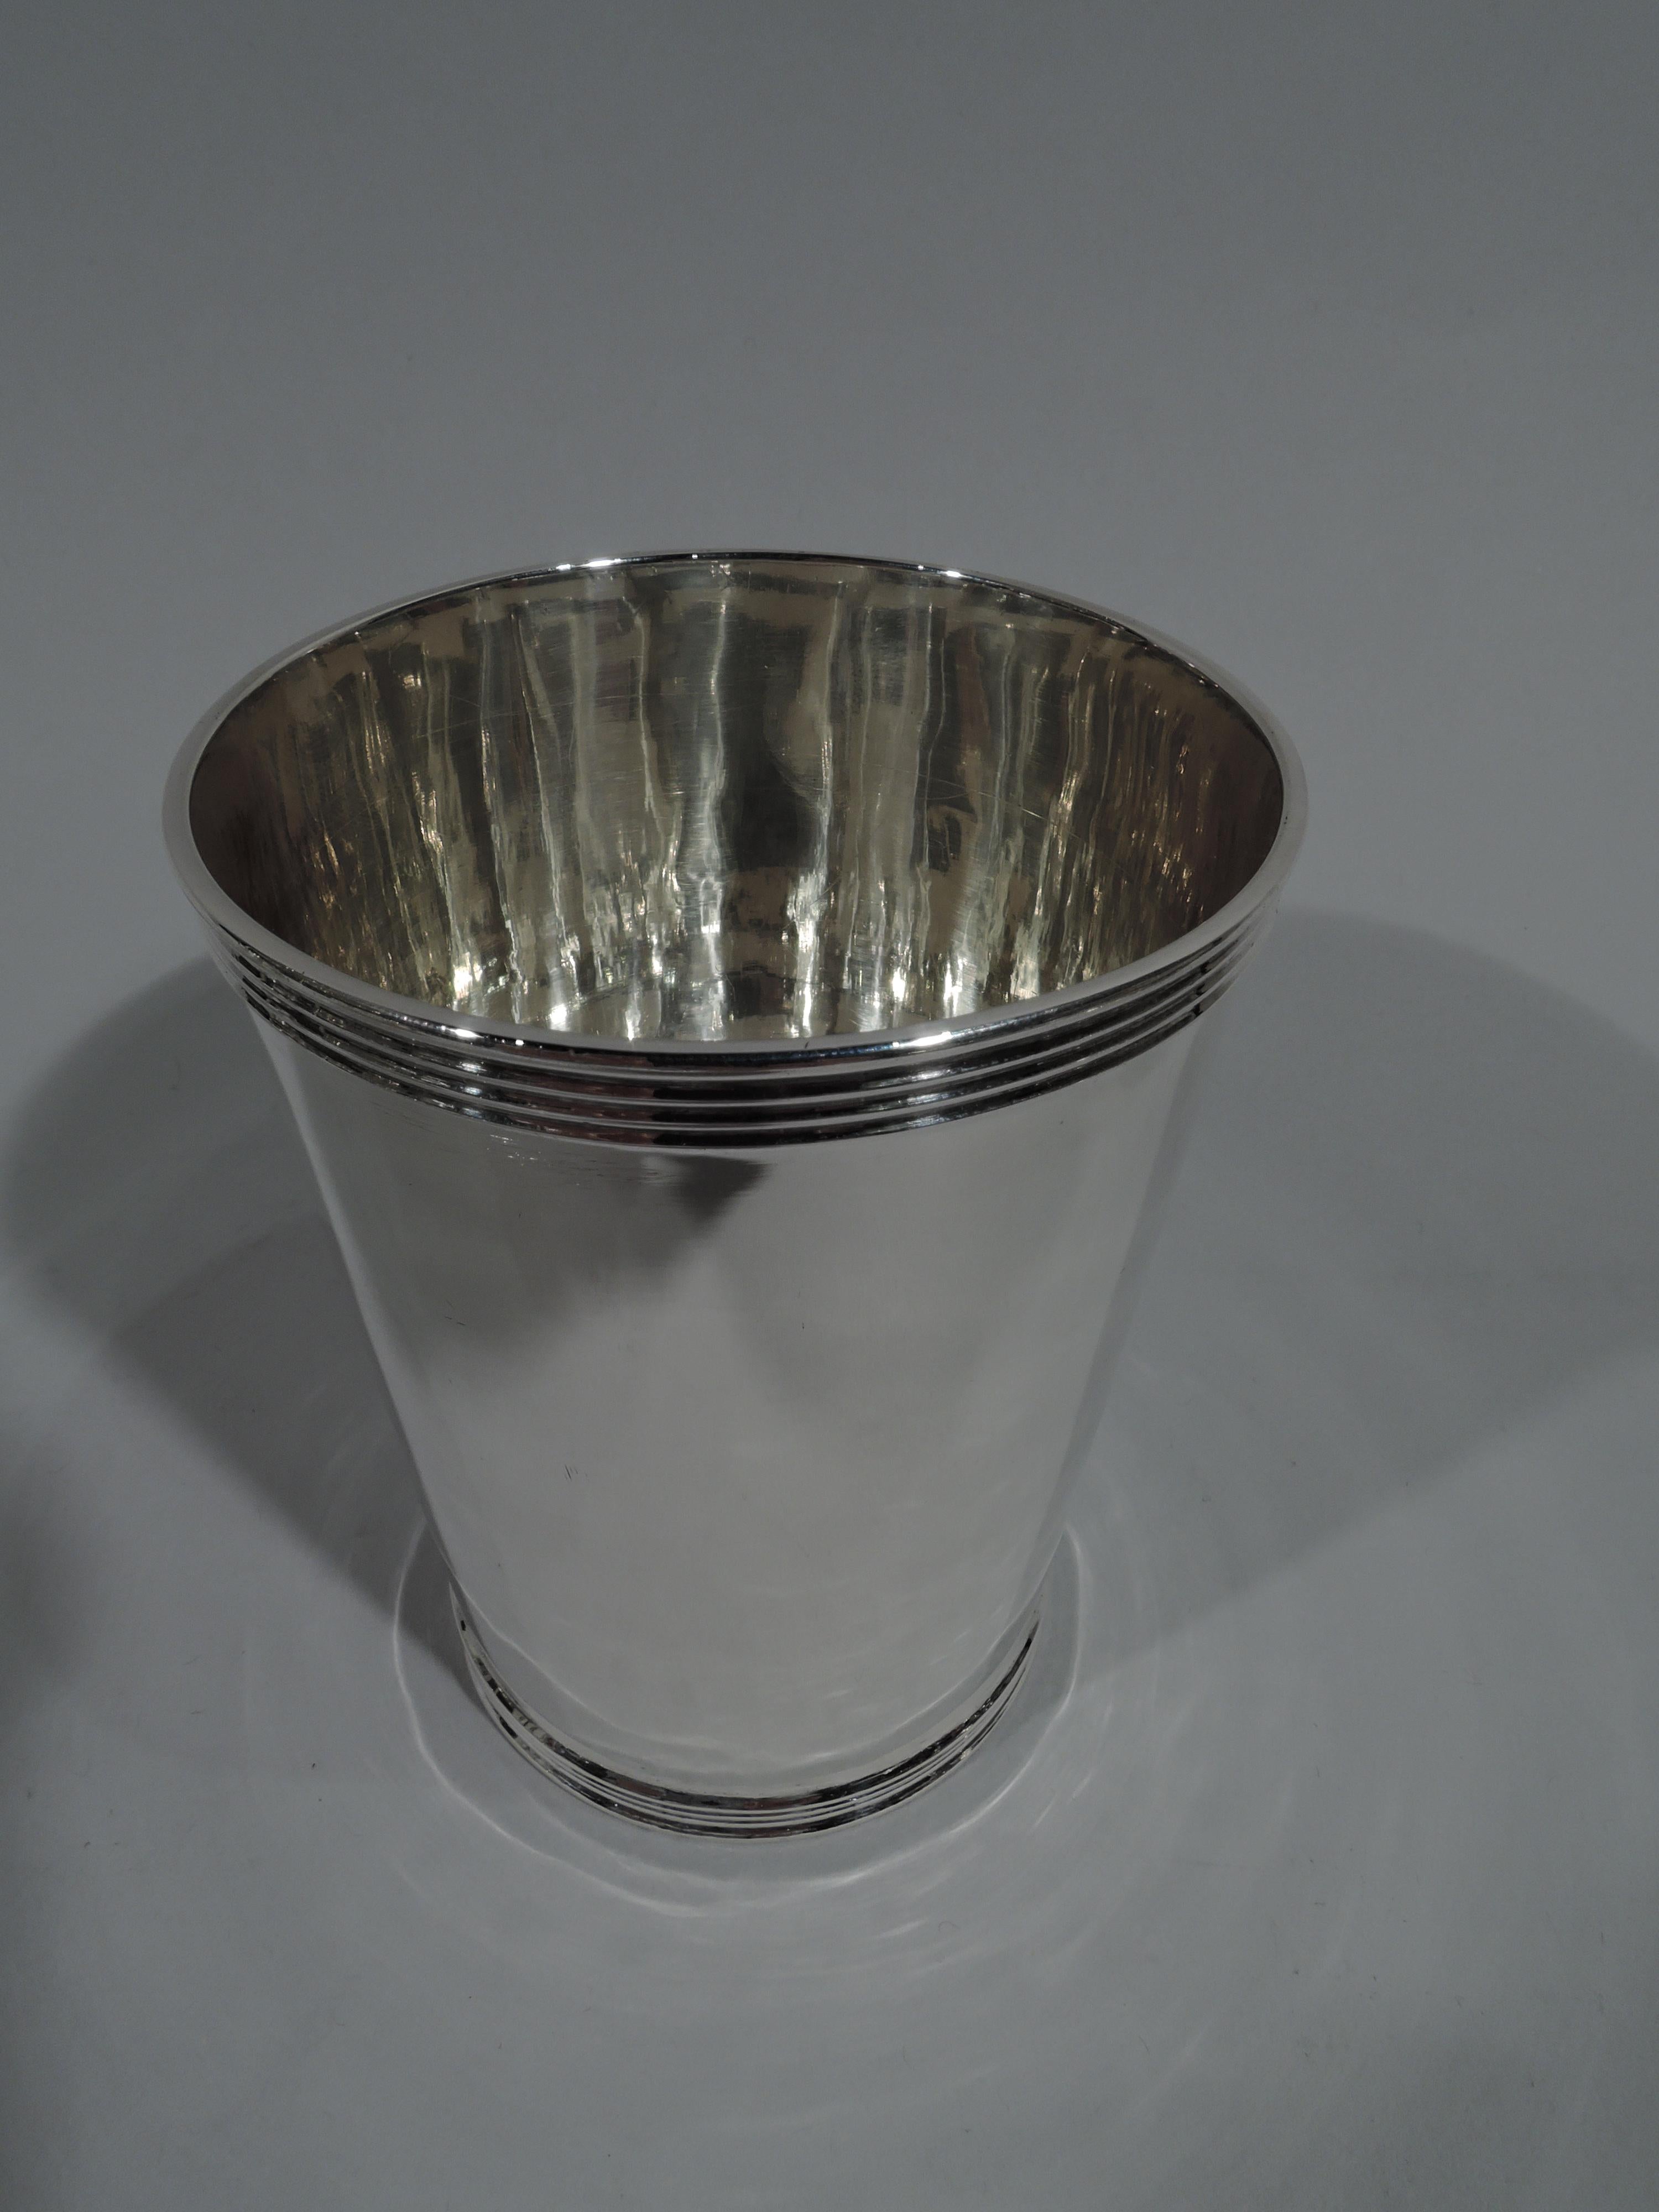 Modern Set of 4 American Sterling Silver Mint Julep Cups by Frank W. Smith